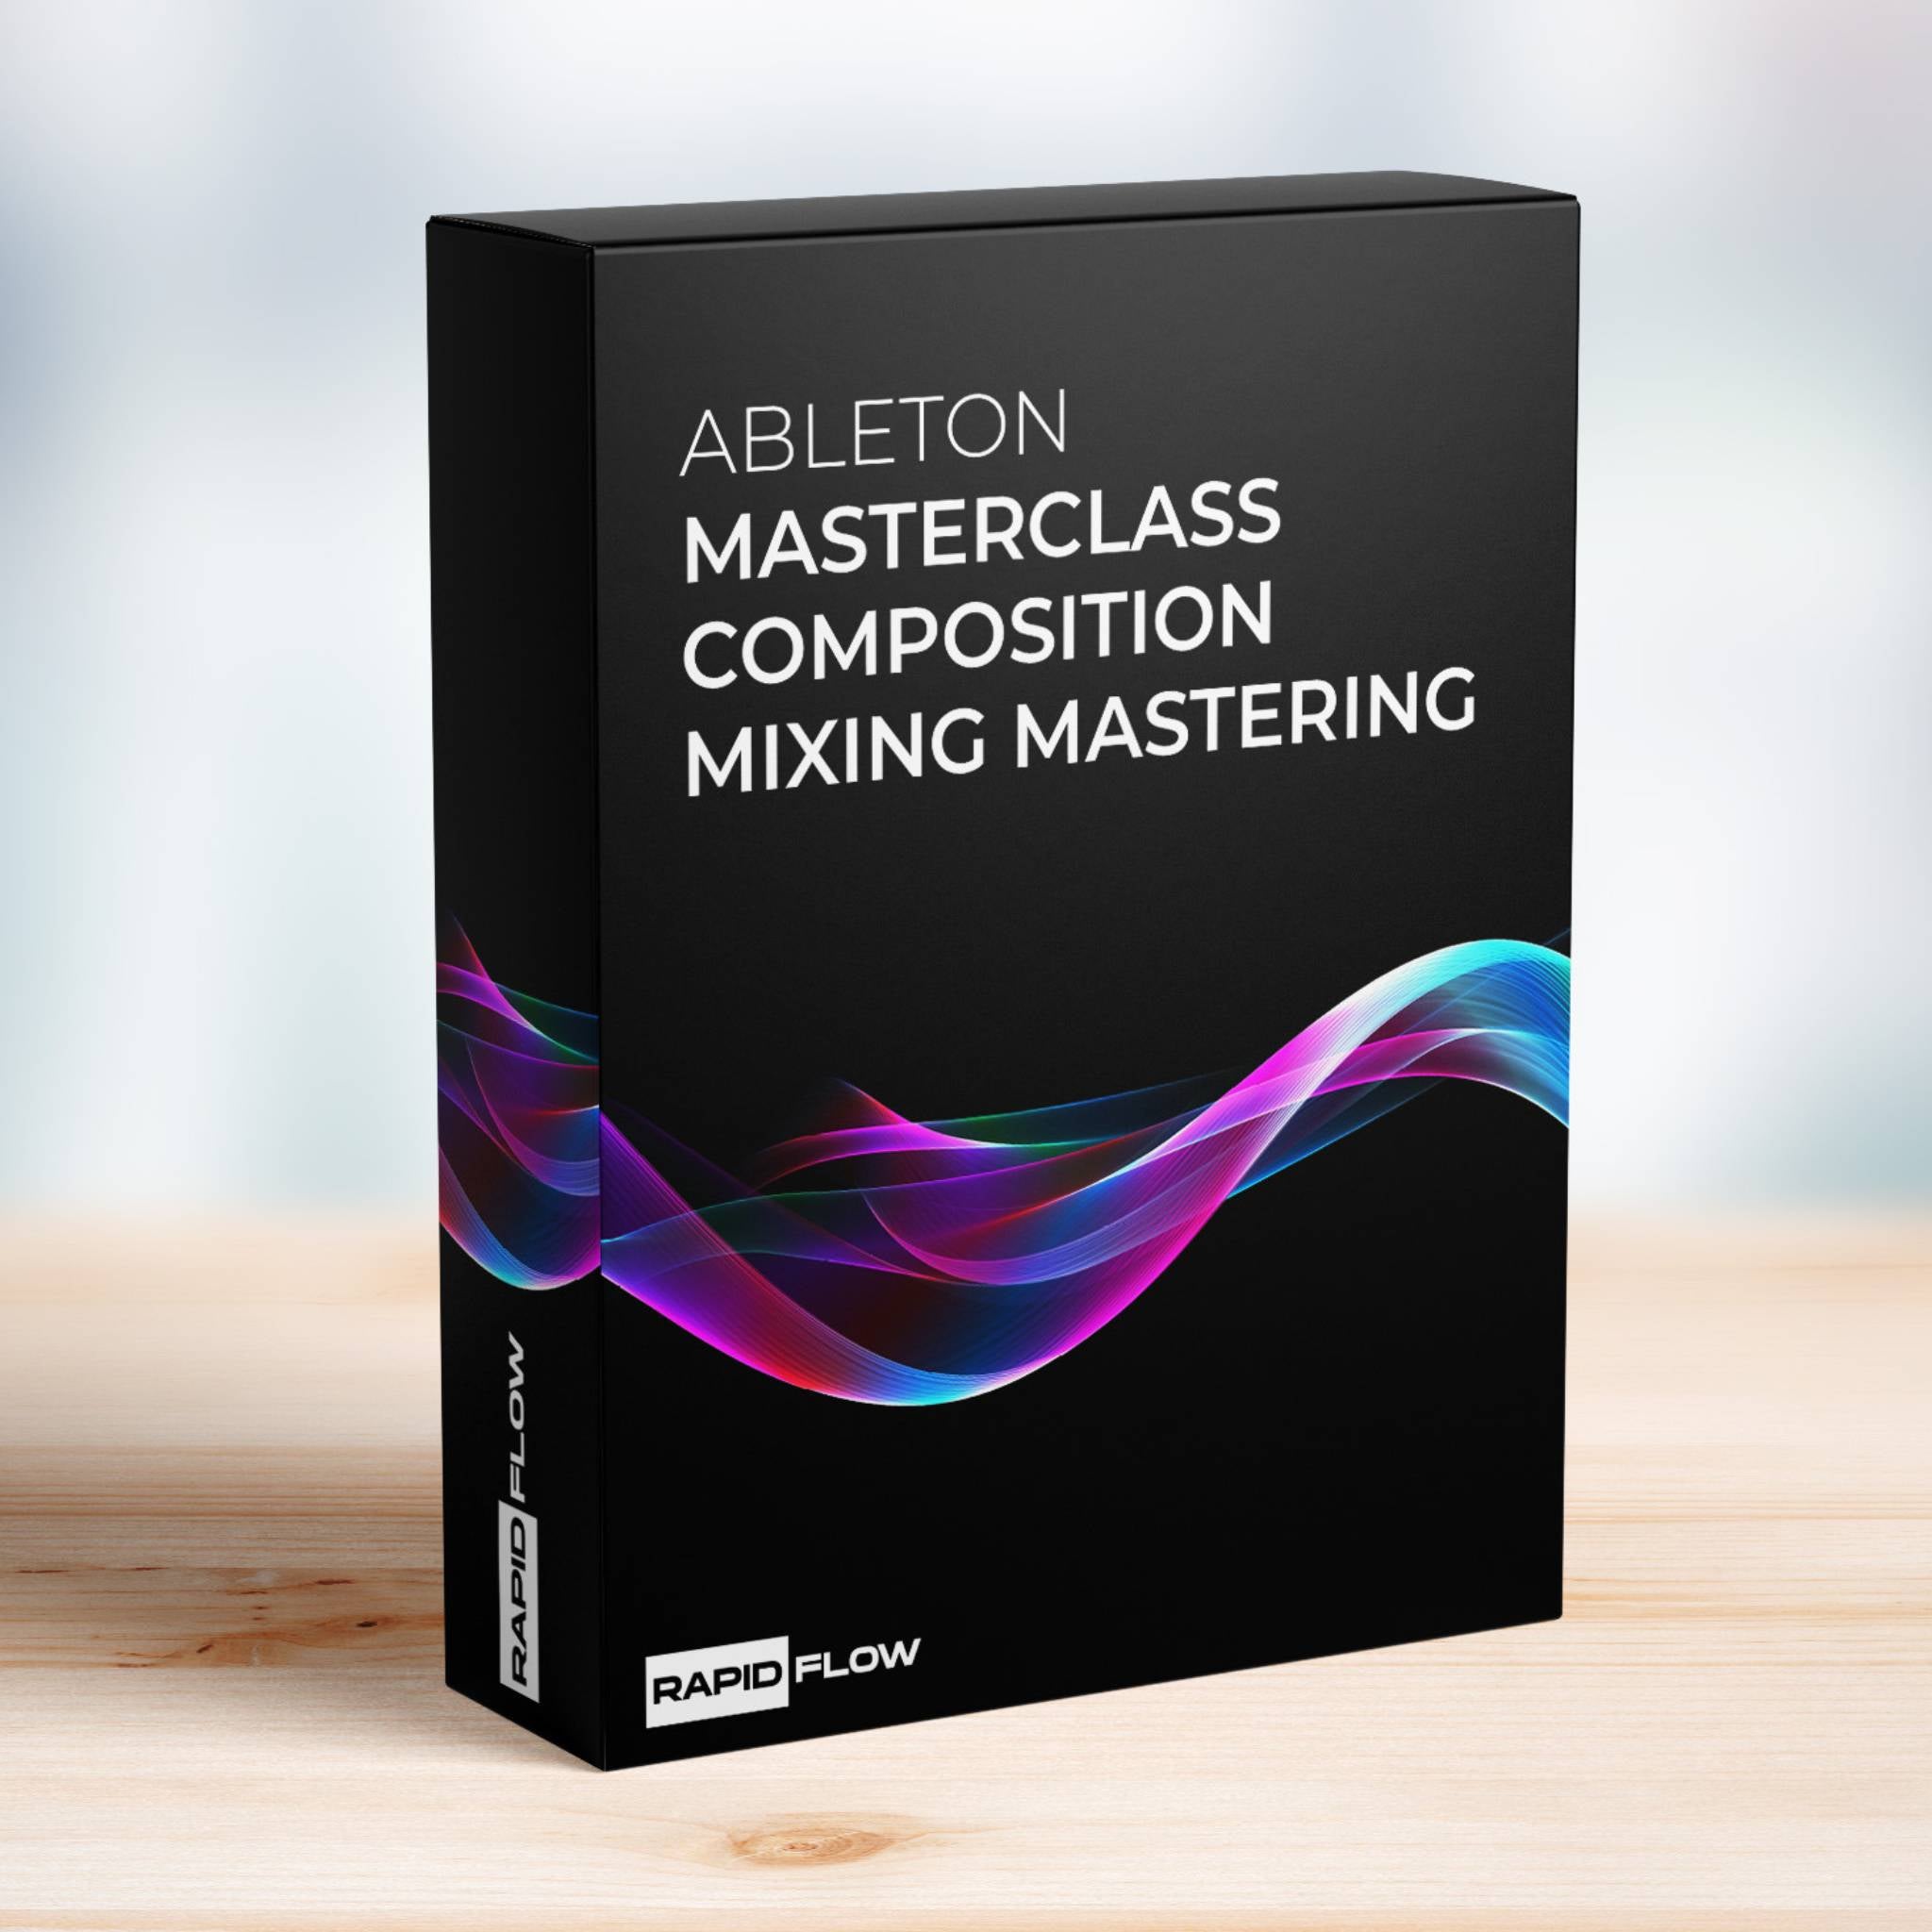 Ableton Masterclass Composition Mixing Mastering